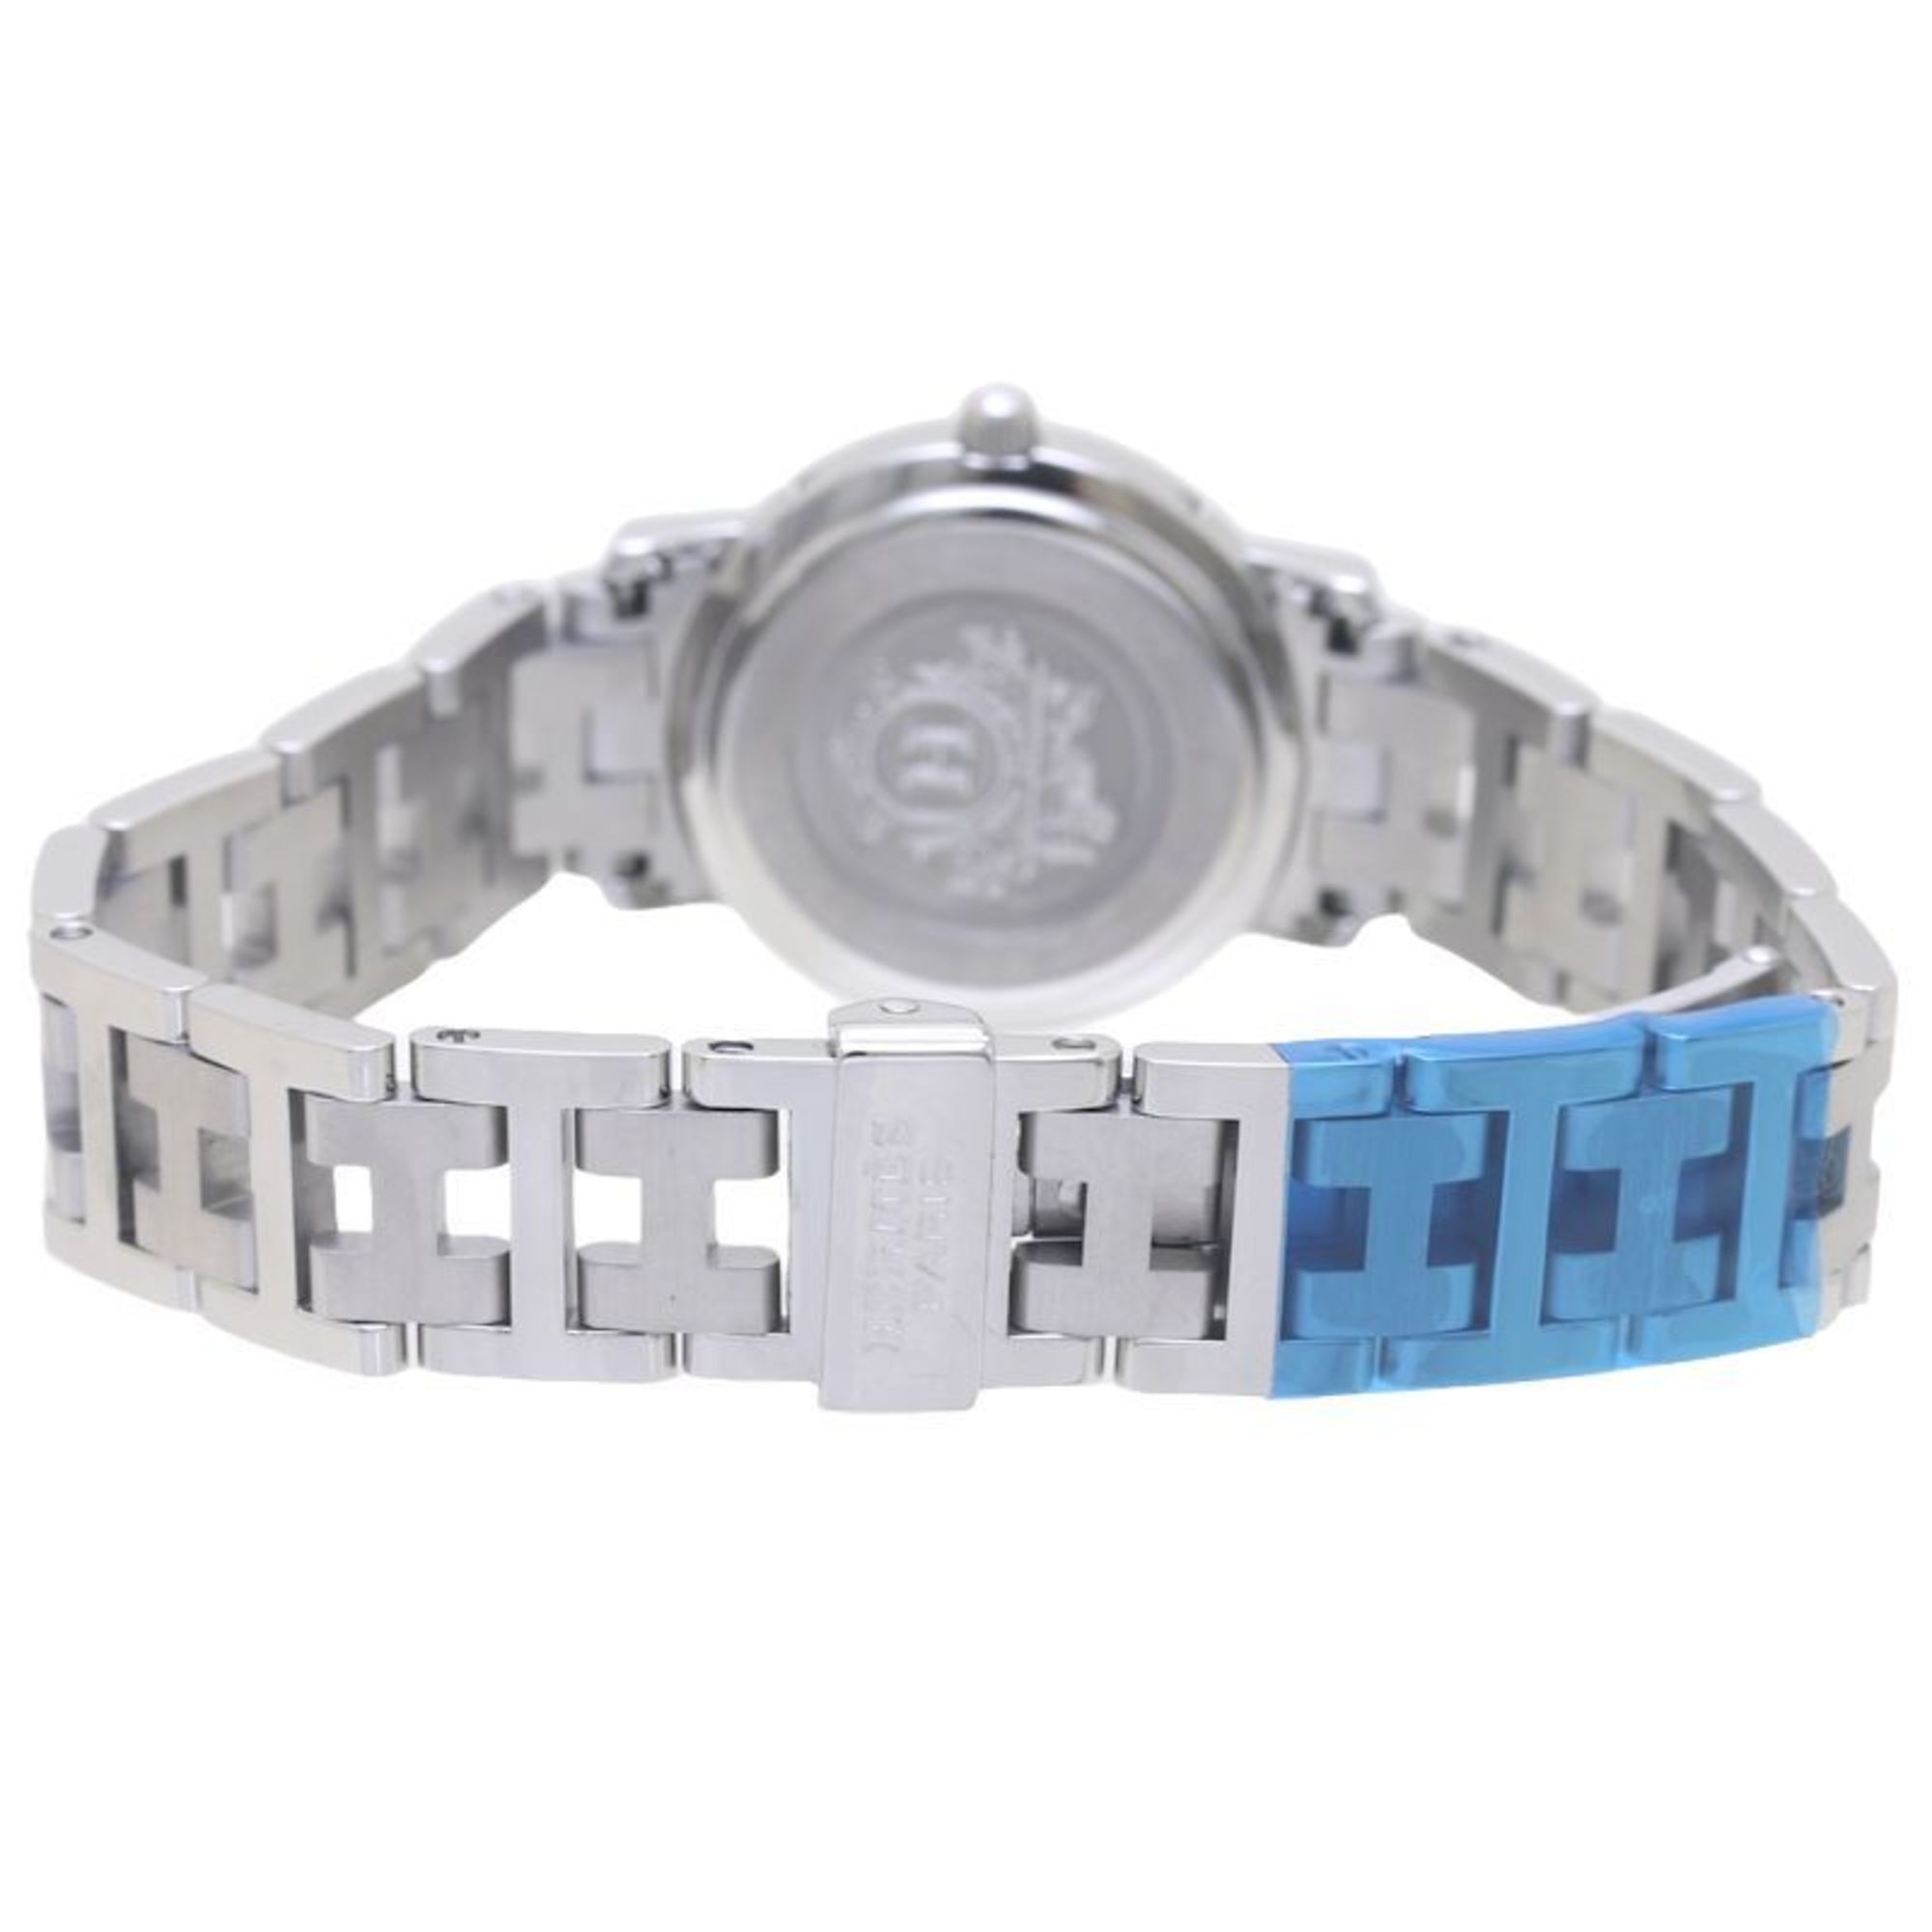 HERMES Clipper CL4.210.431 3758 Old Buckle Stainless Steel Ladies 130123 Watch